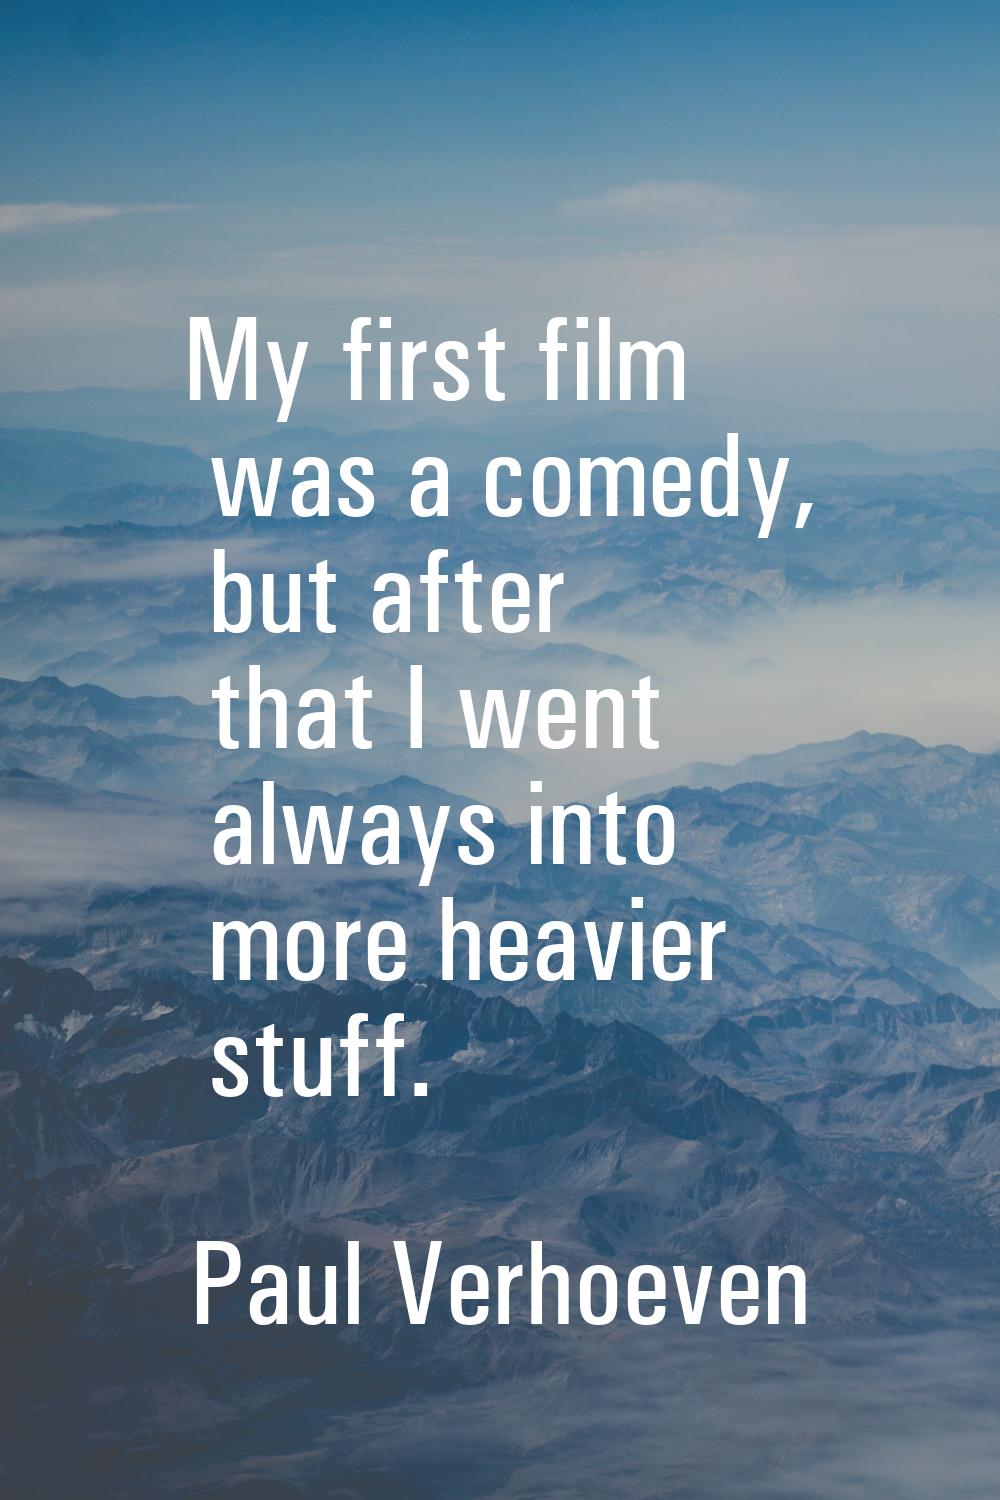 My first film was a comedy, but after that I went always into more heavier stuff.